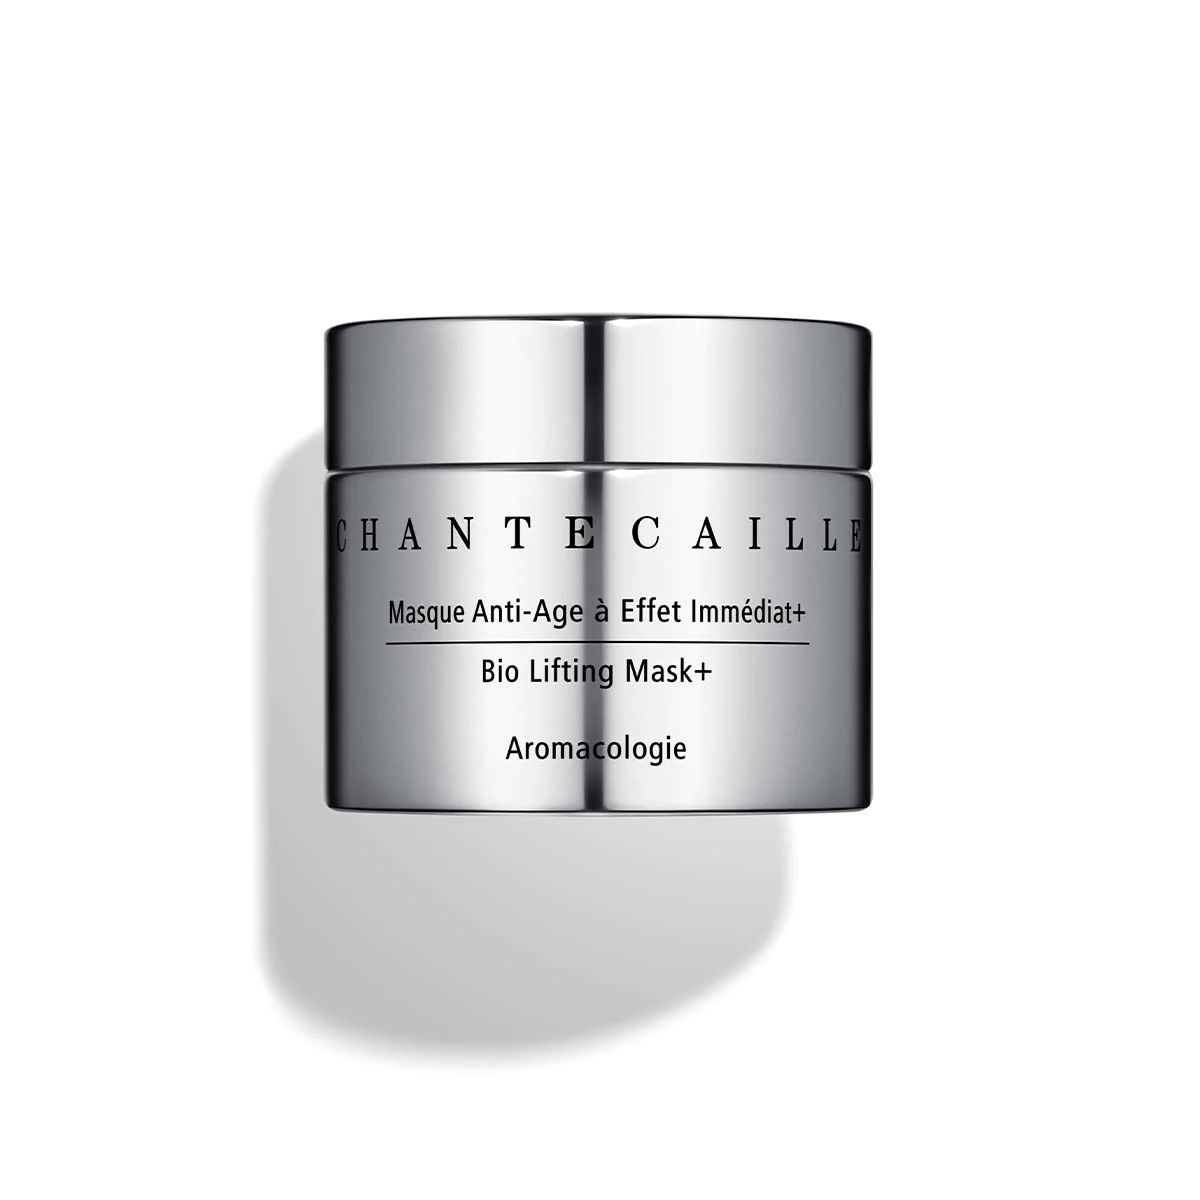 Bio Lifting Mask+ | New Formula Anti-ageing Best Selling Mask by Chantecaille | Chantecaille UK 